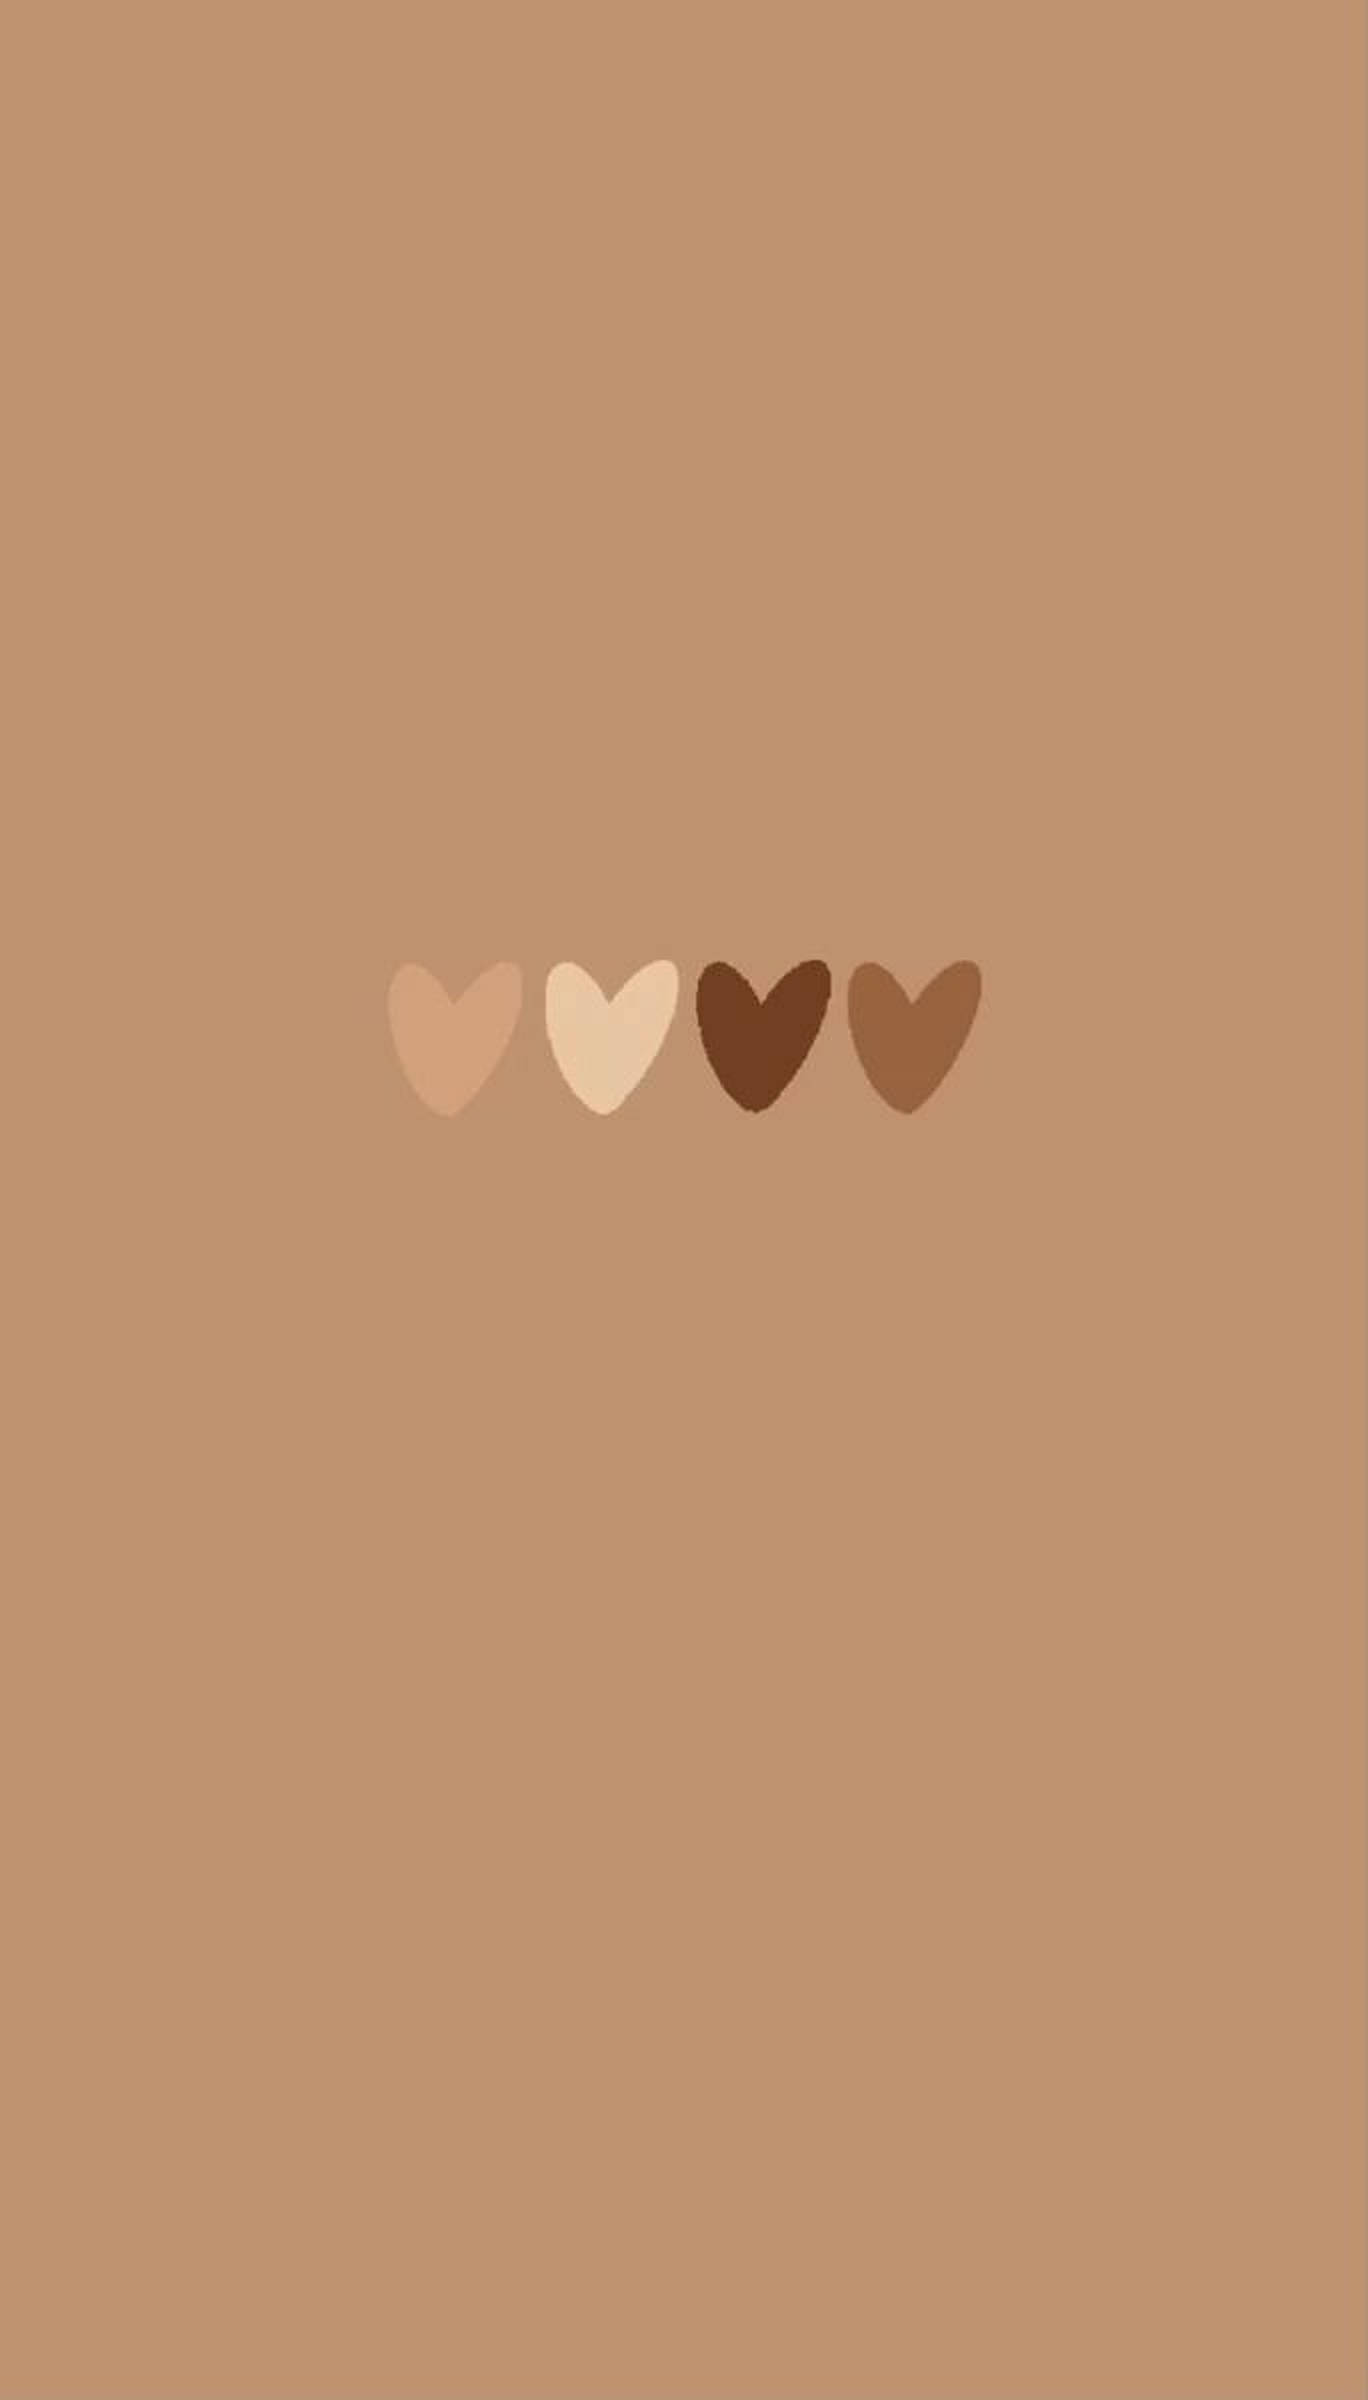 HD wallpaper brown heart illustration texture surface backgrounds love   Wallpaper Flare